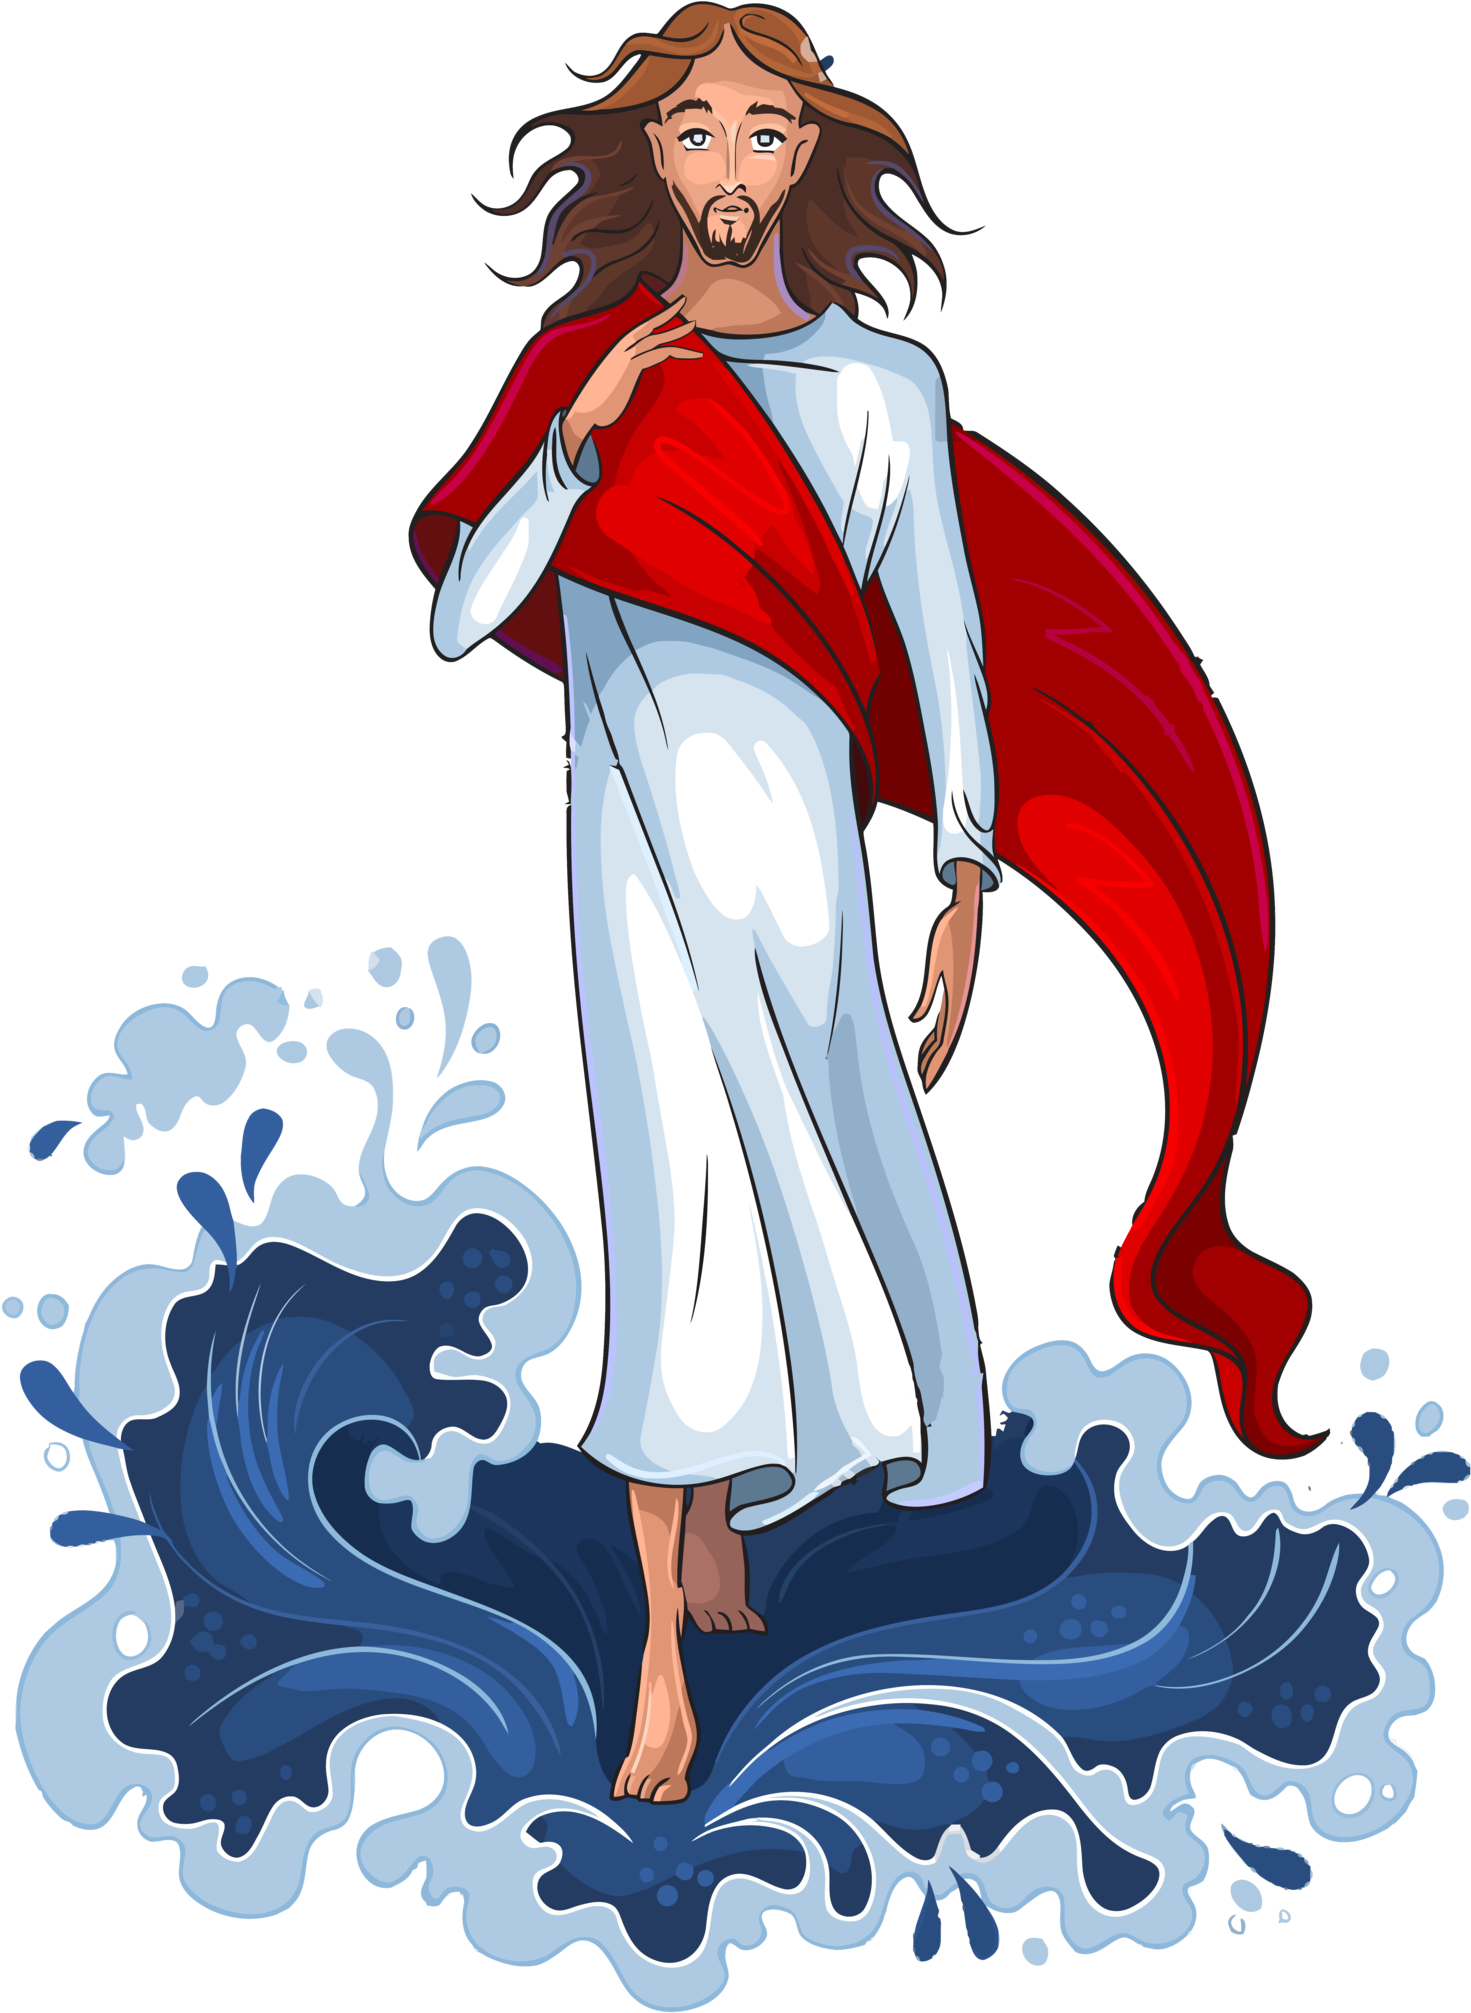 A Cartoon Of A Man In A White Robe And Red Cape